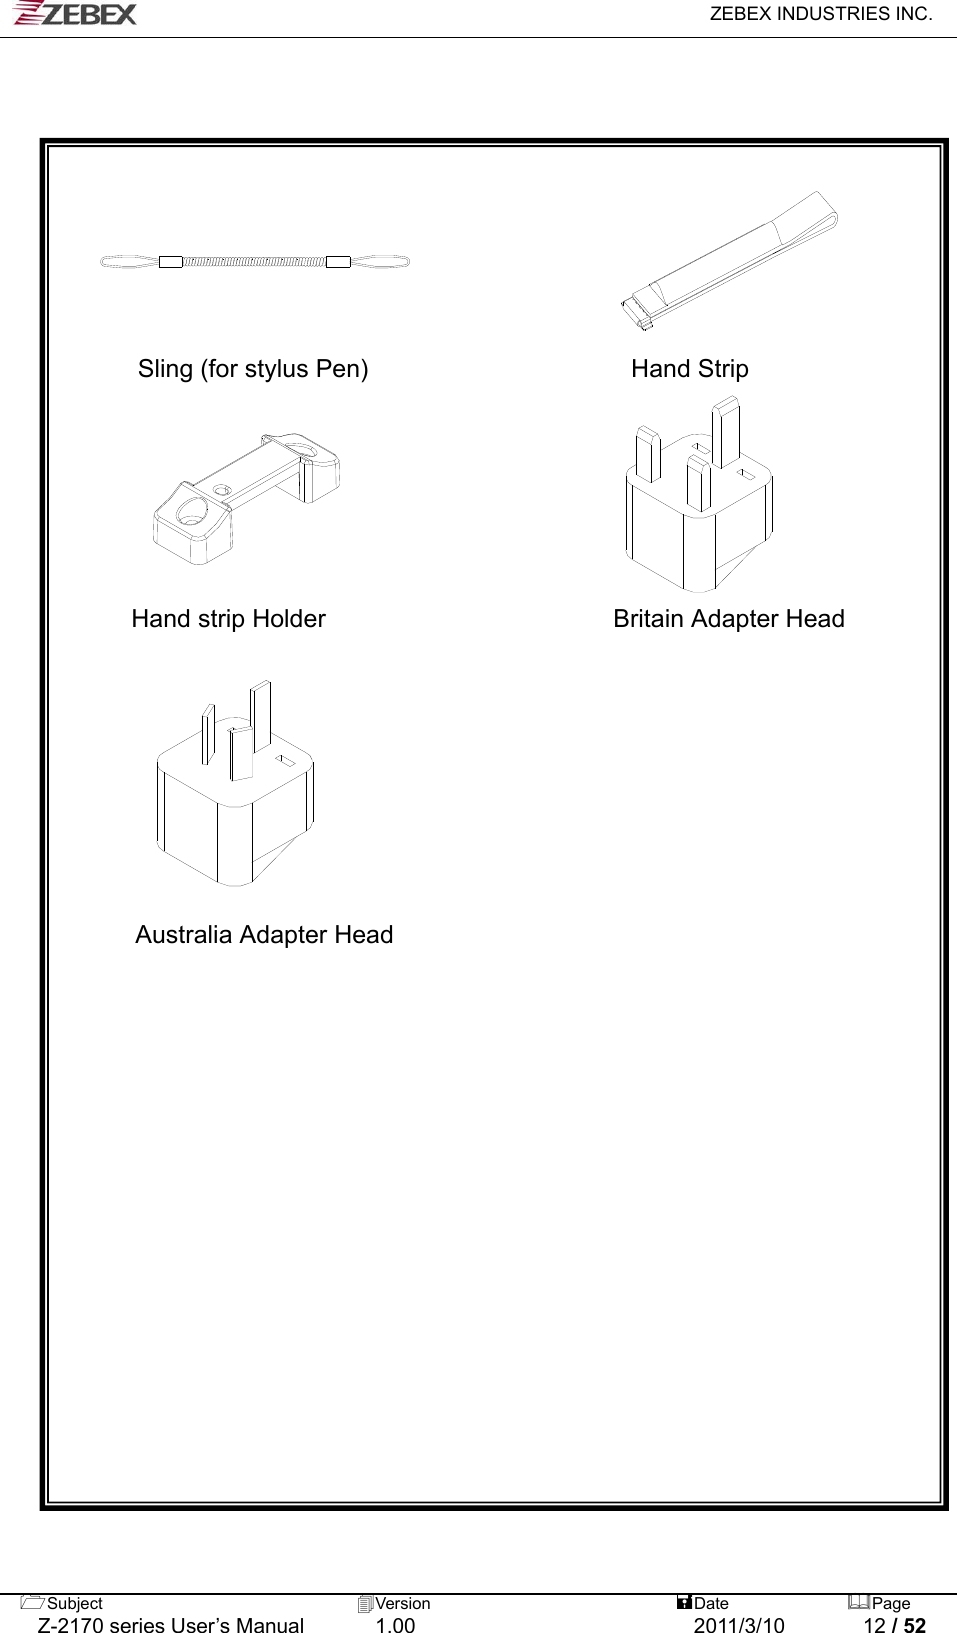   ZEBEX INDUSTRIES INC.  Subject  Version   DatePage   Z-2170 series User’s Manual  1.00  2011/3/10  12 / 52          Sling (for stylus Pen)                     Hand Strip       Hand strip Holder                       Britain Adapter Head           Australia Adapter Head 